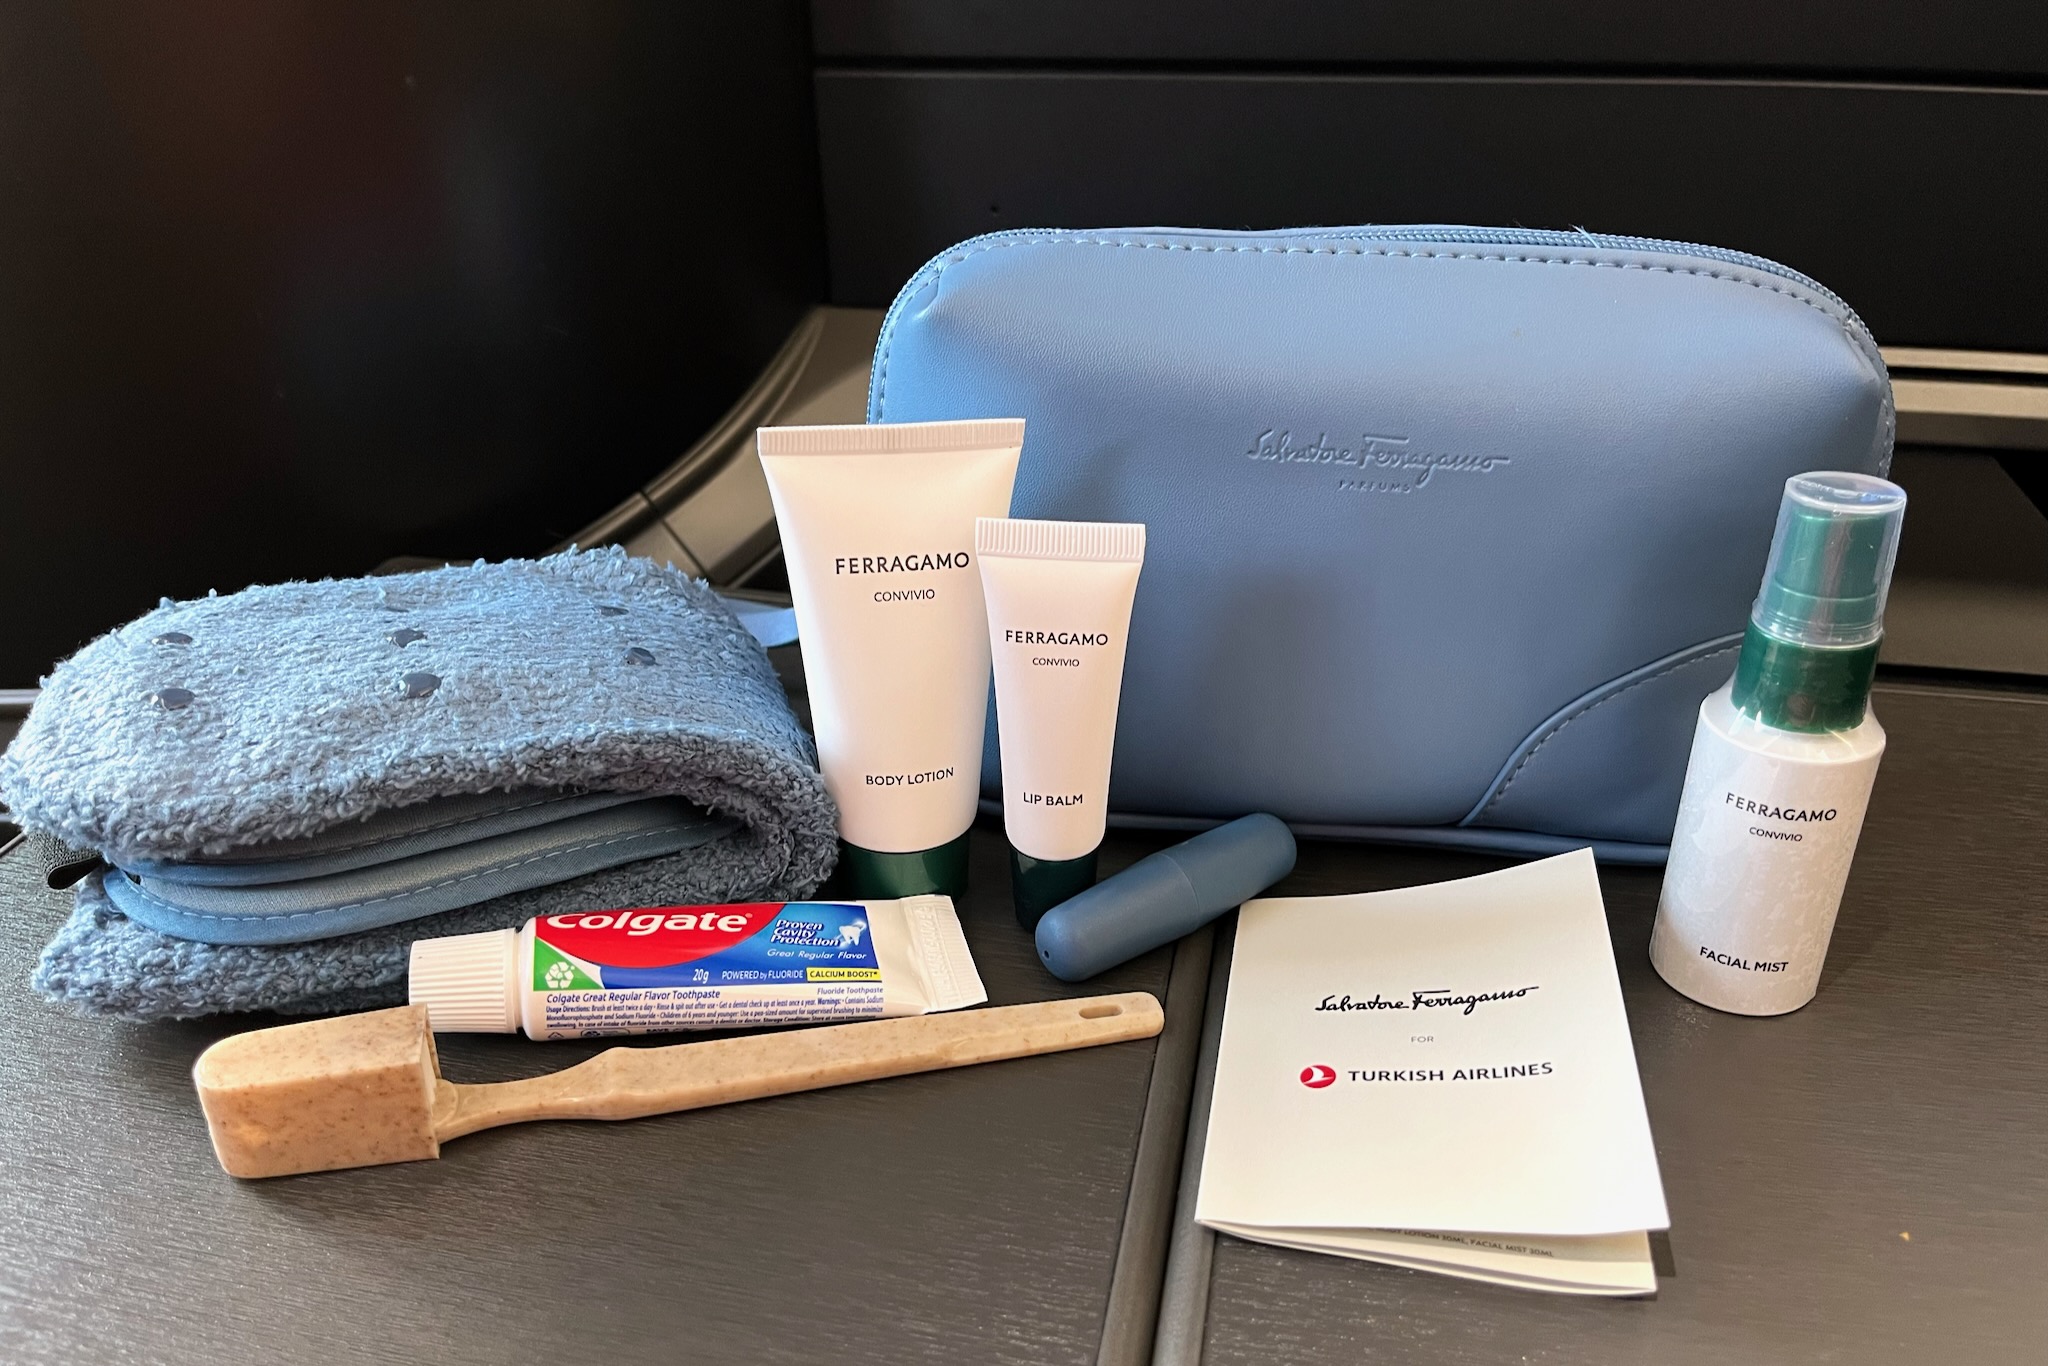 Turkish Airlines Business Class Amenity Kit